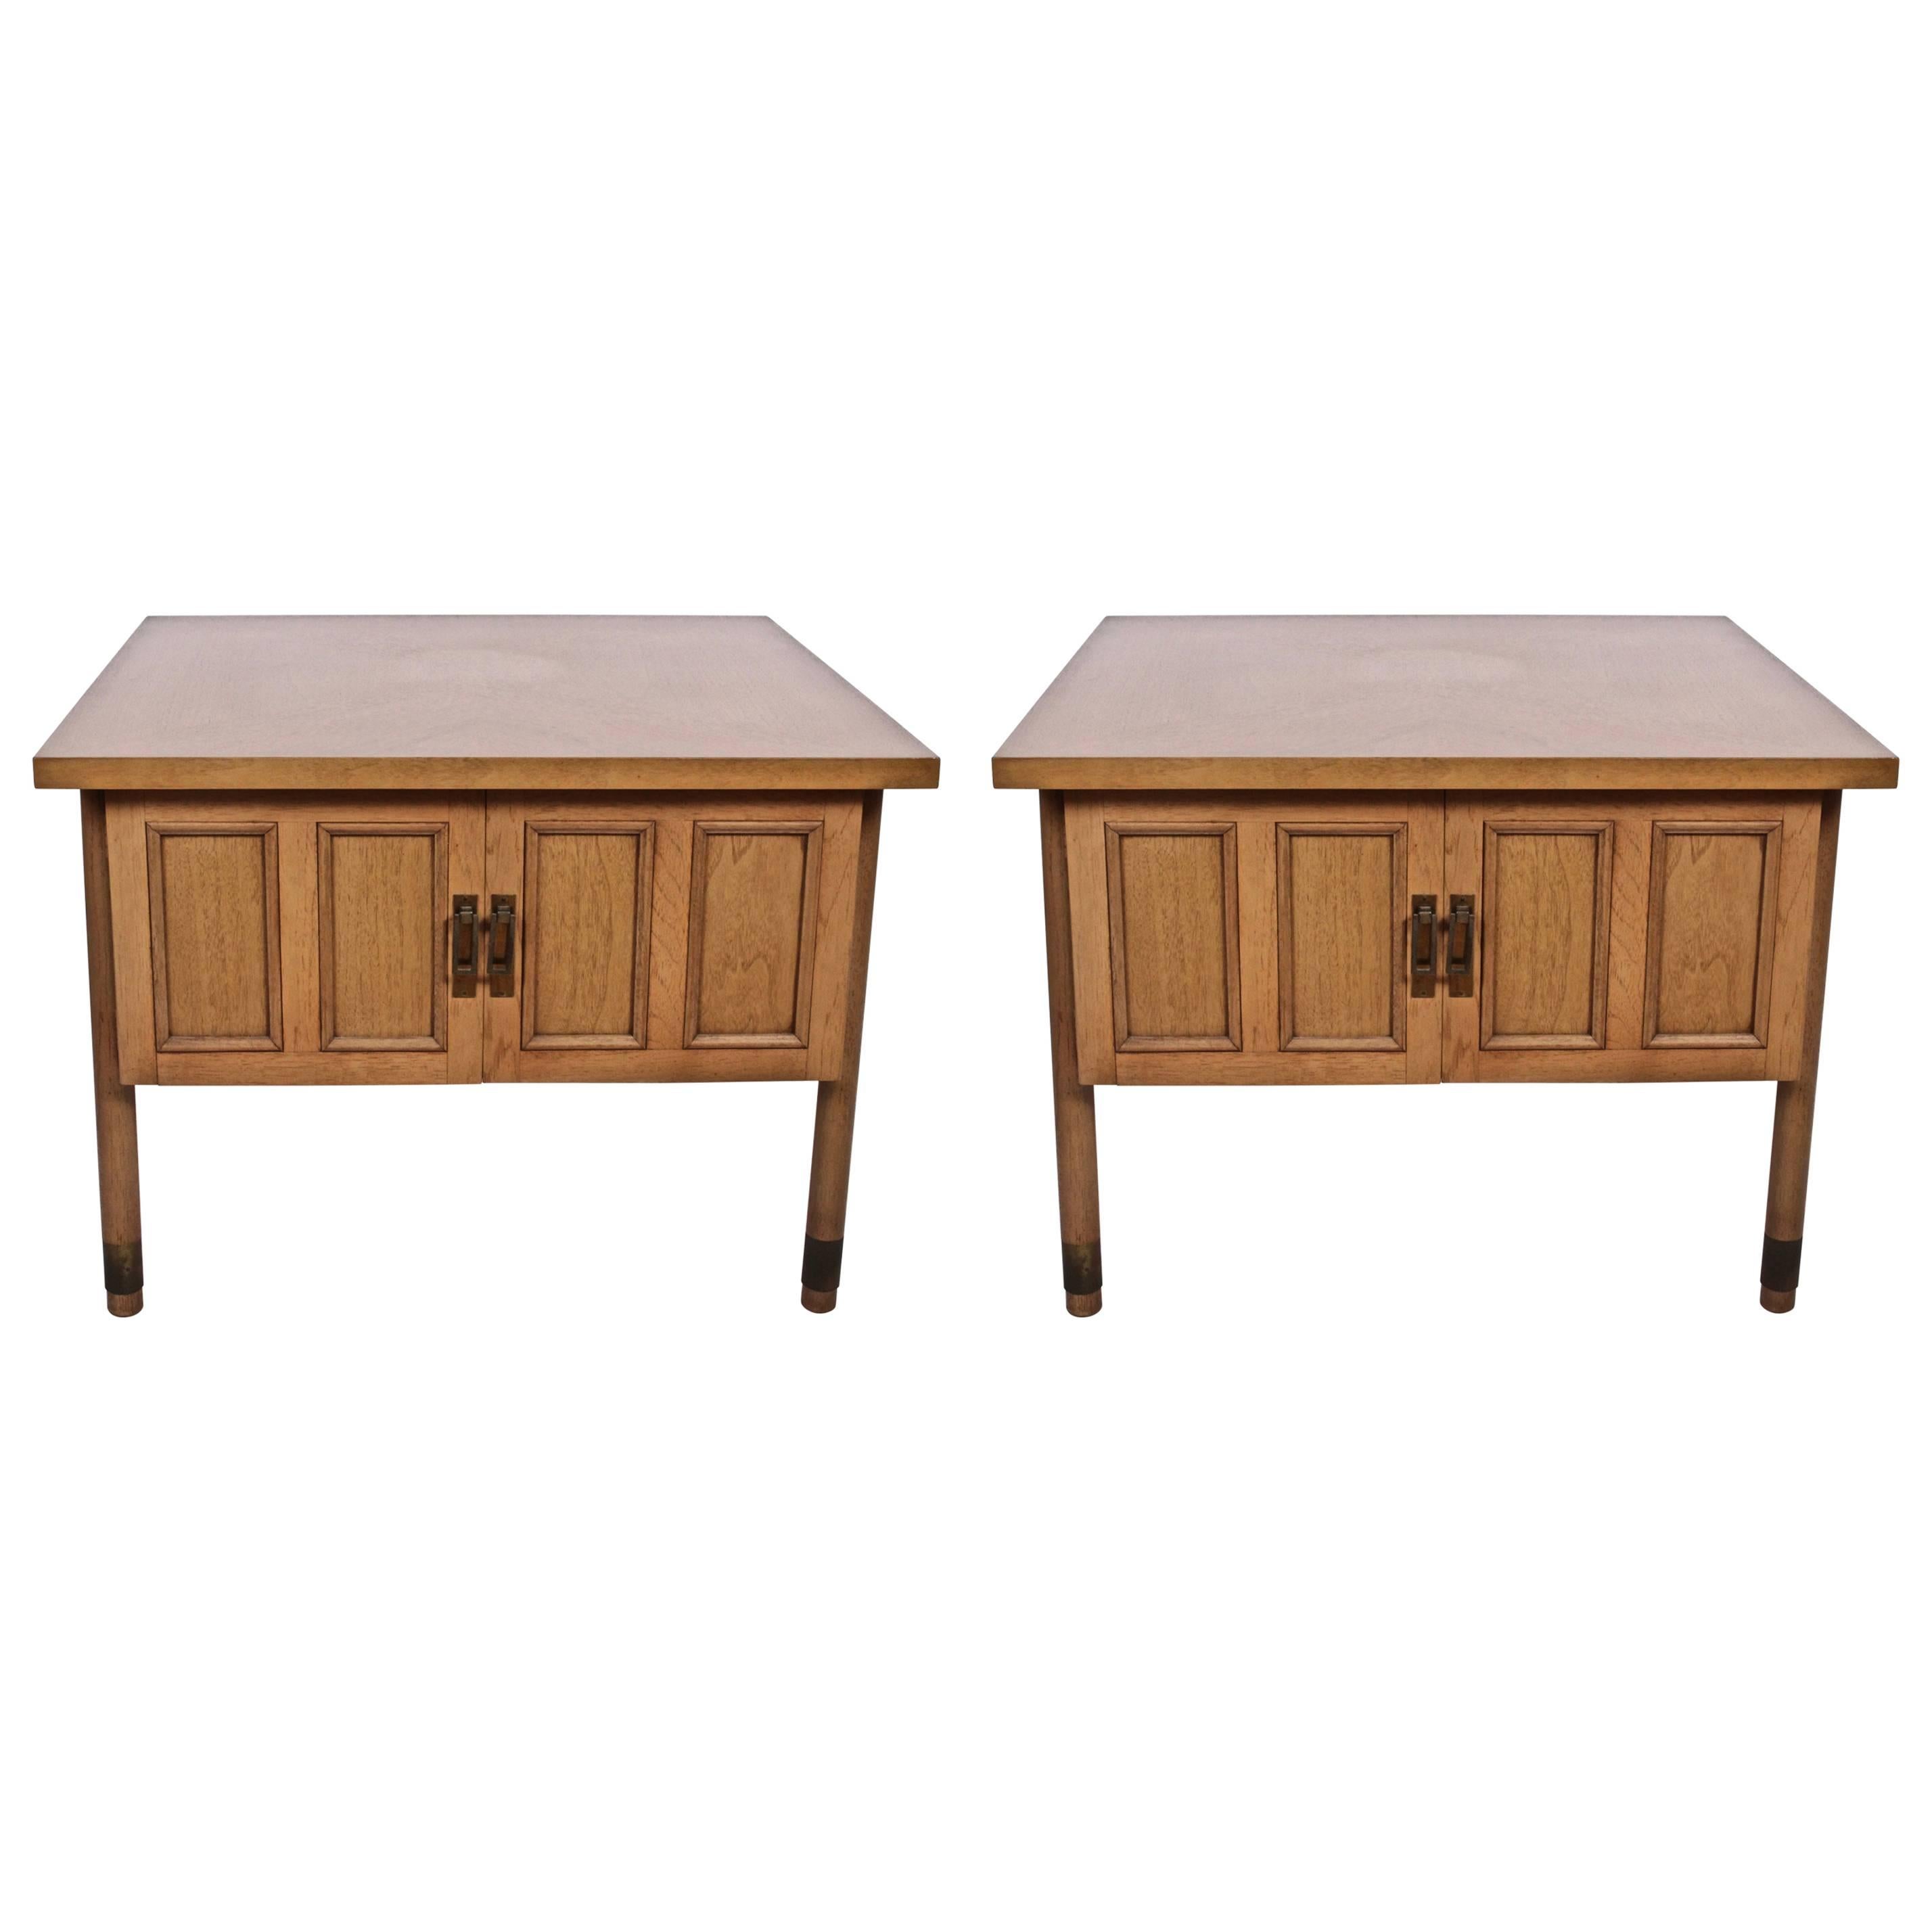 Pair Bleached Mahogany Chevron Inlay Latched End Tables, Nightstands, C. 1960